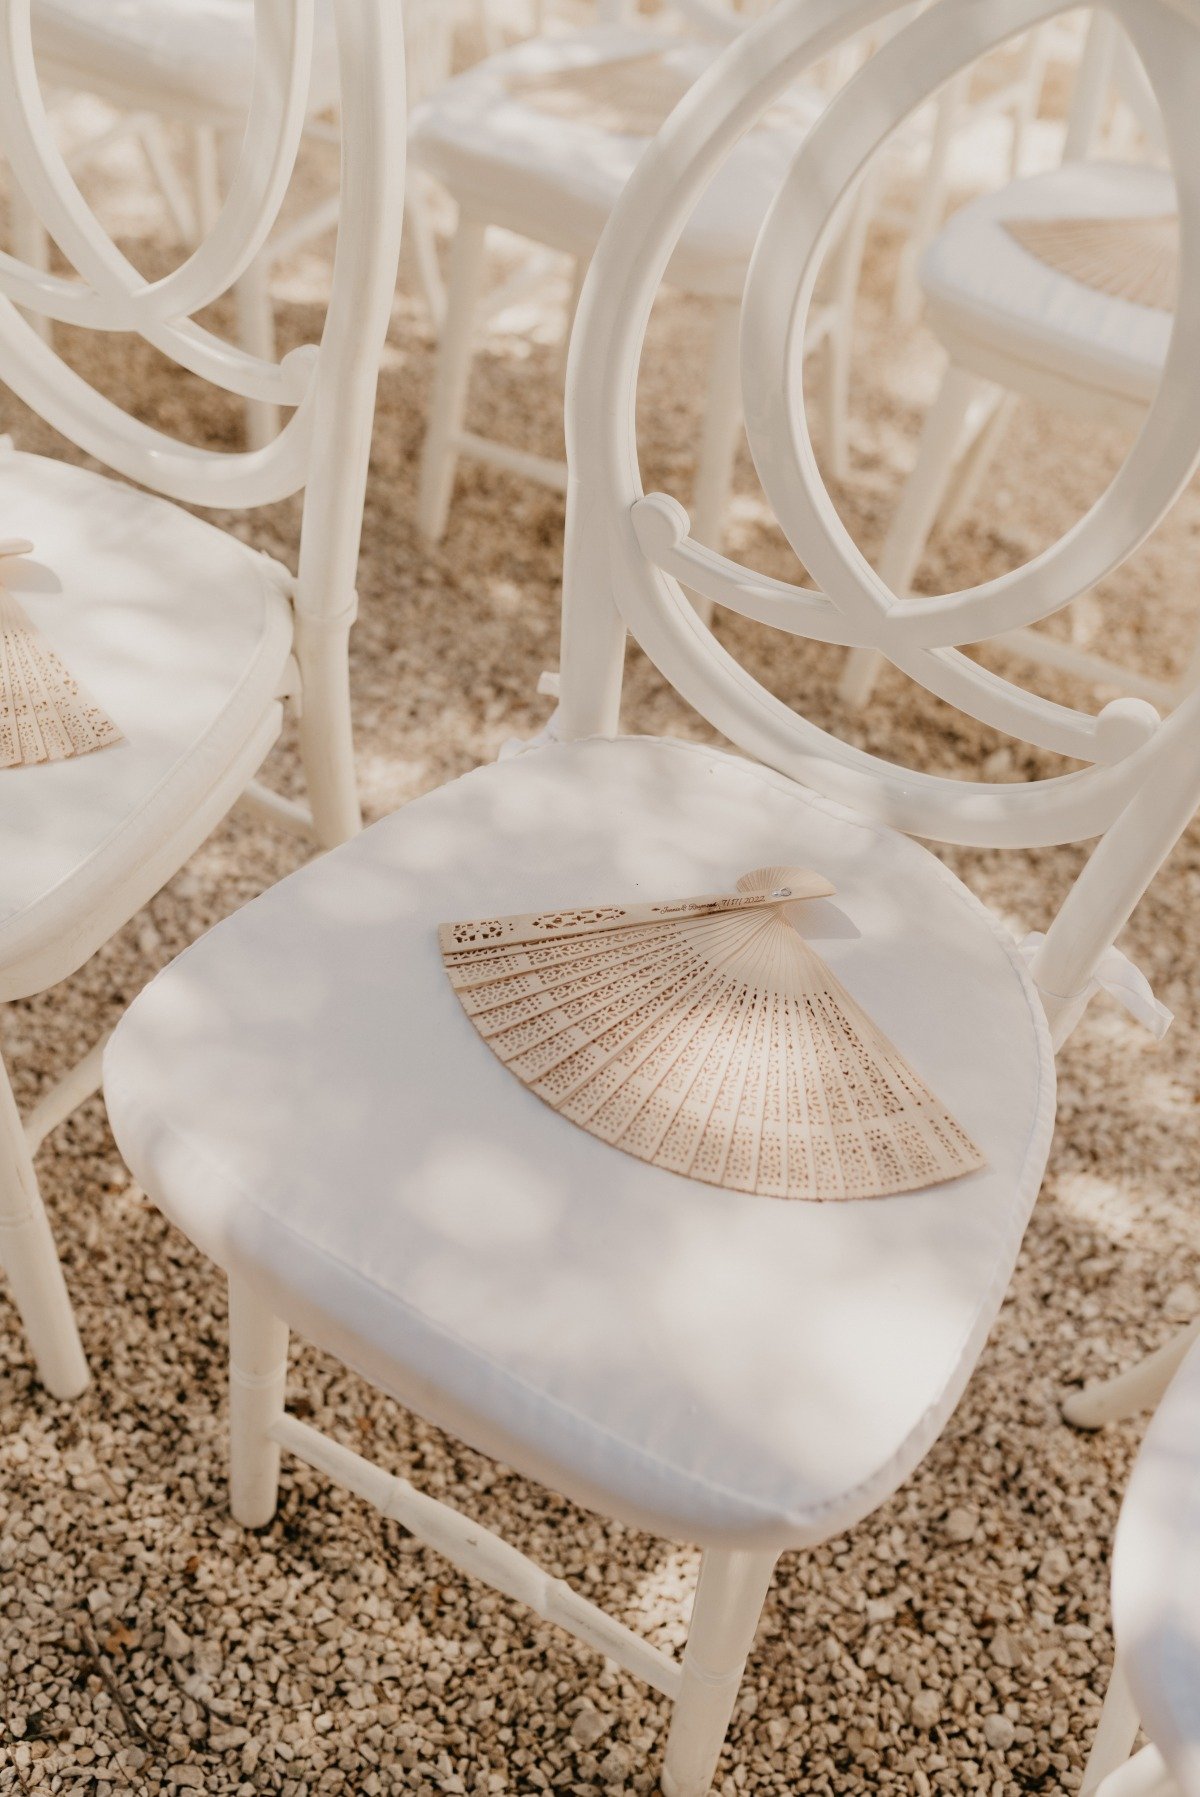 Chic wedding seats with wood fan